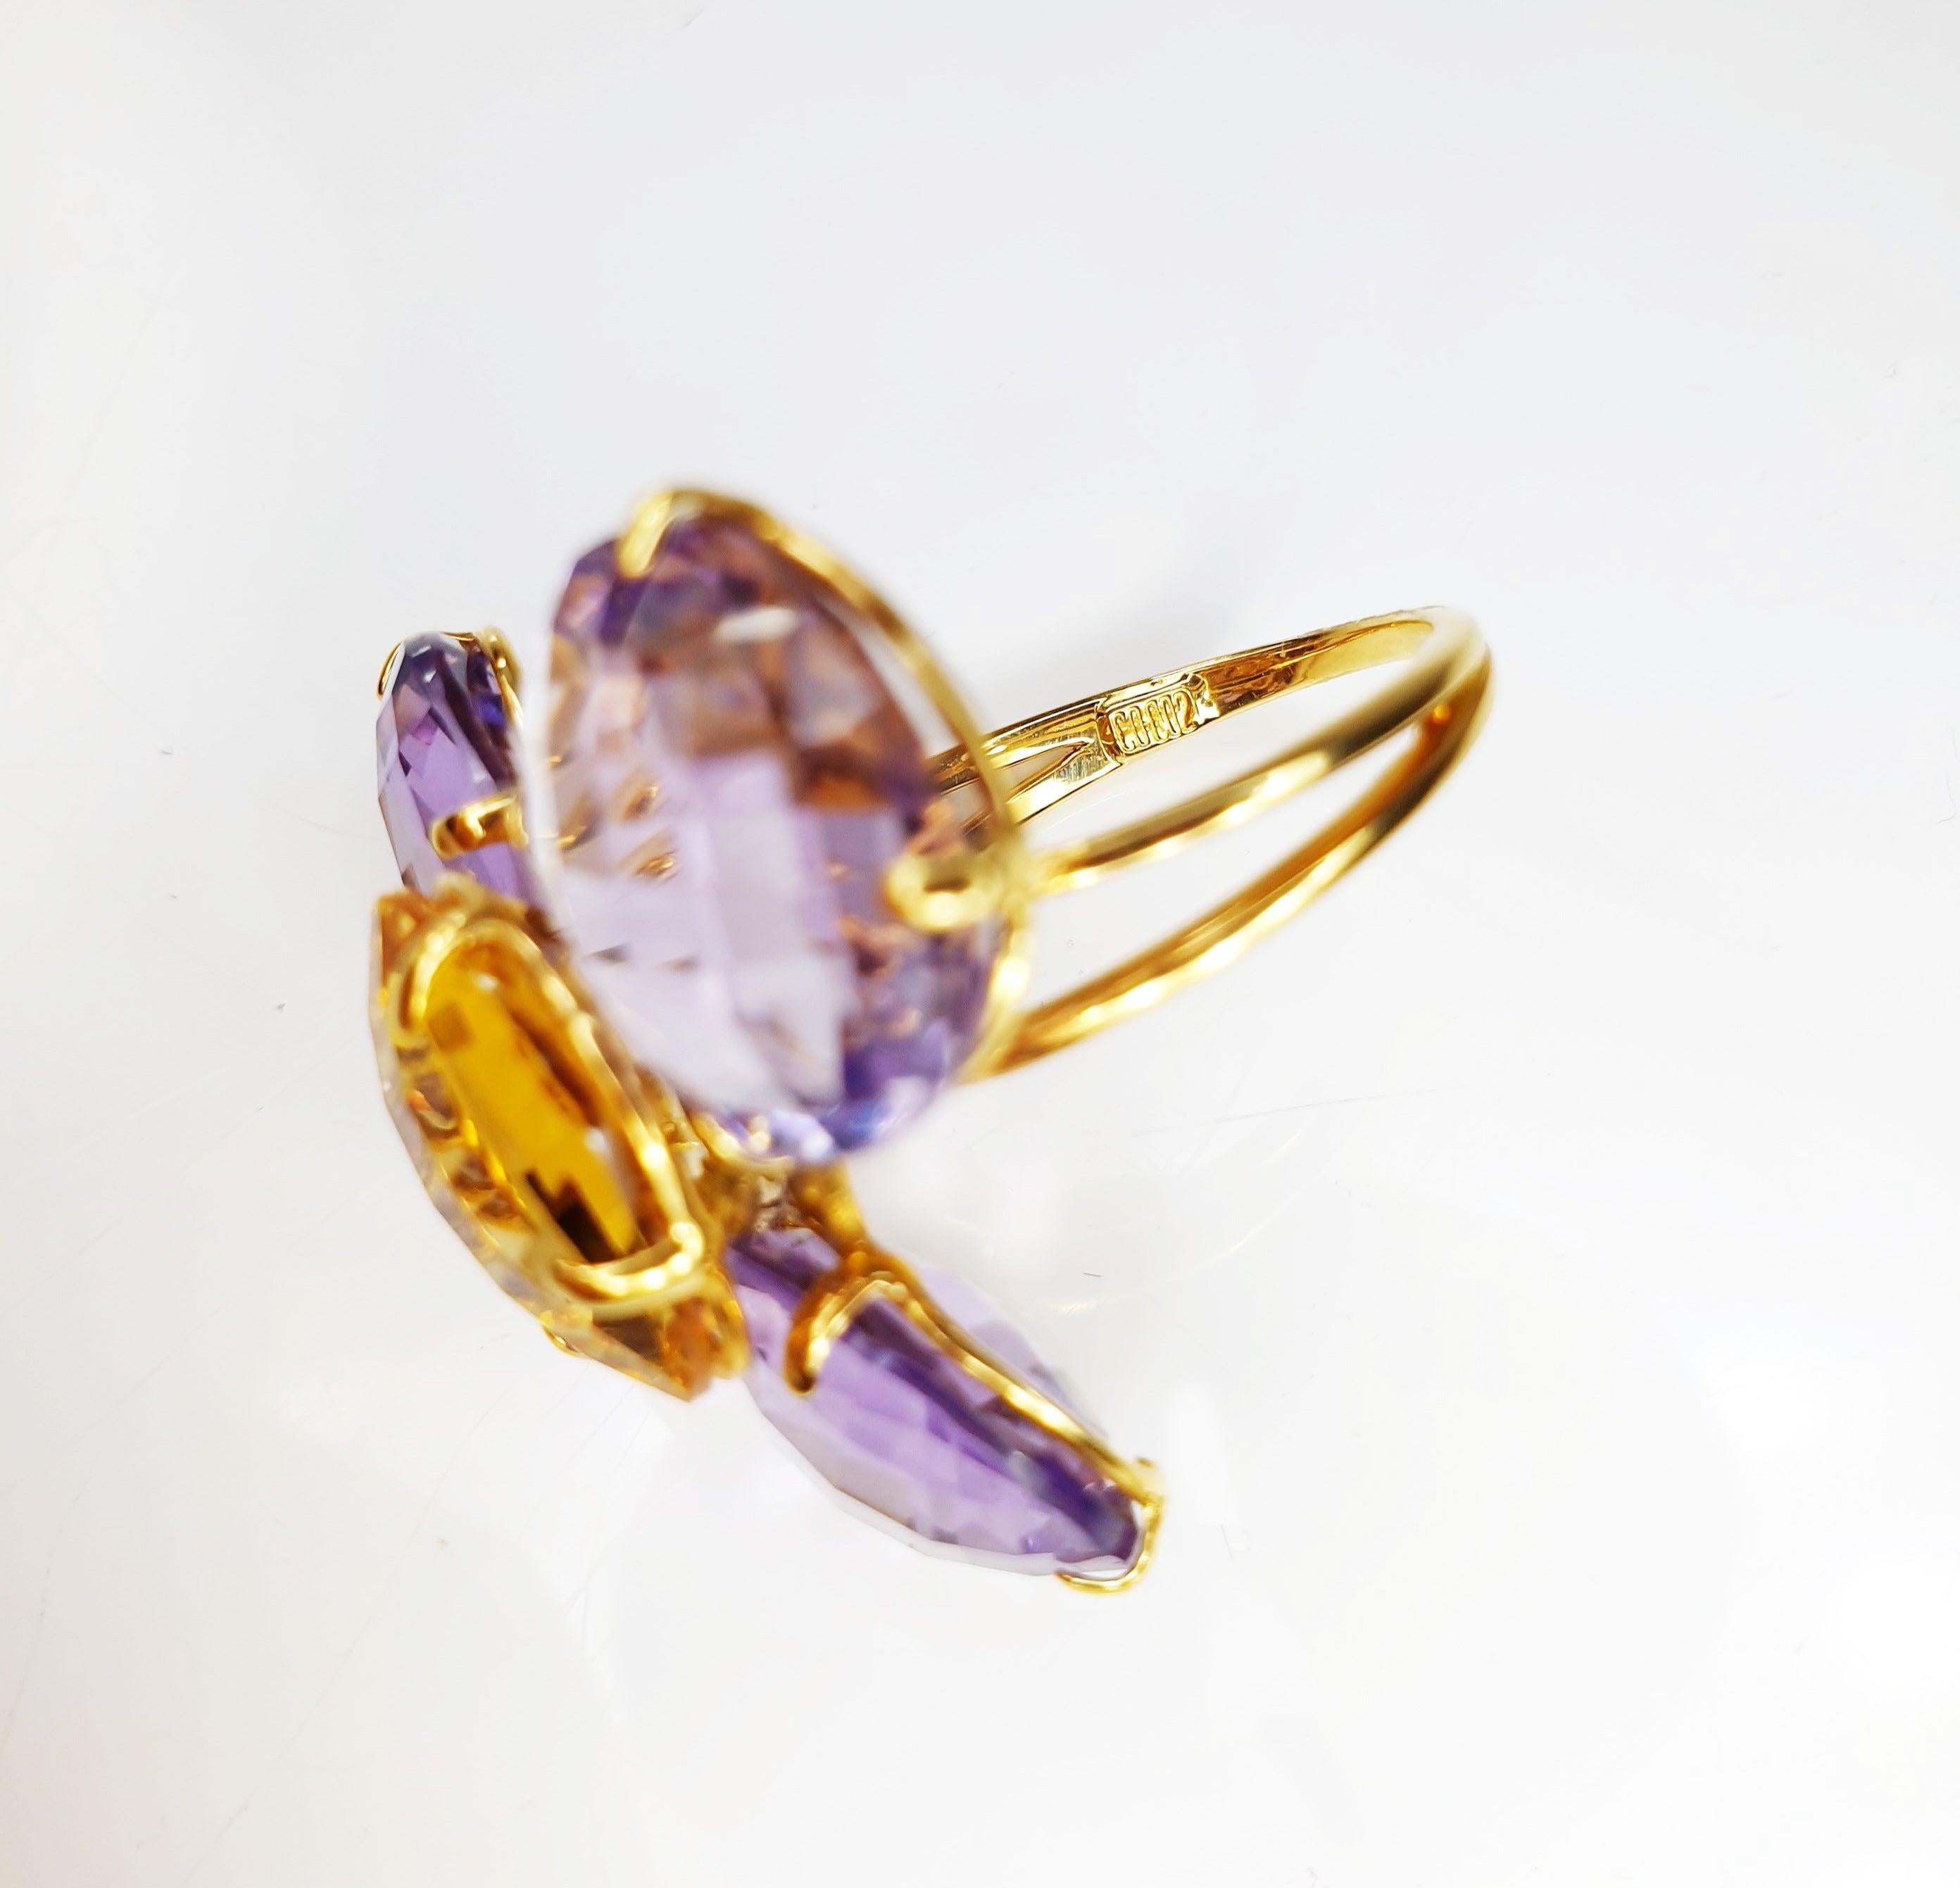 Multiphaceted Flower Ring with Central Citrine and Three Amethysts 5